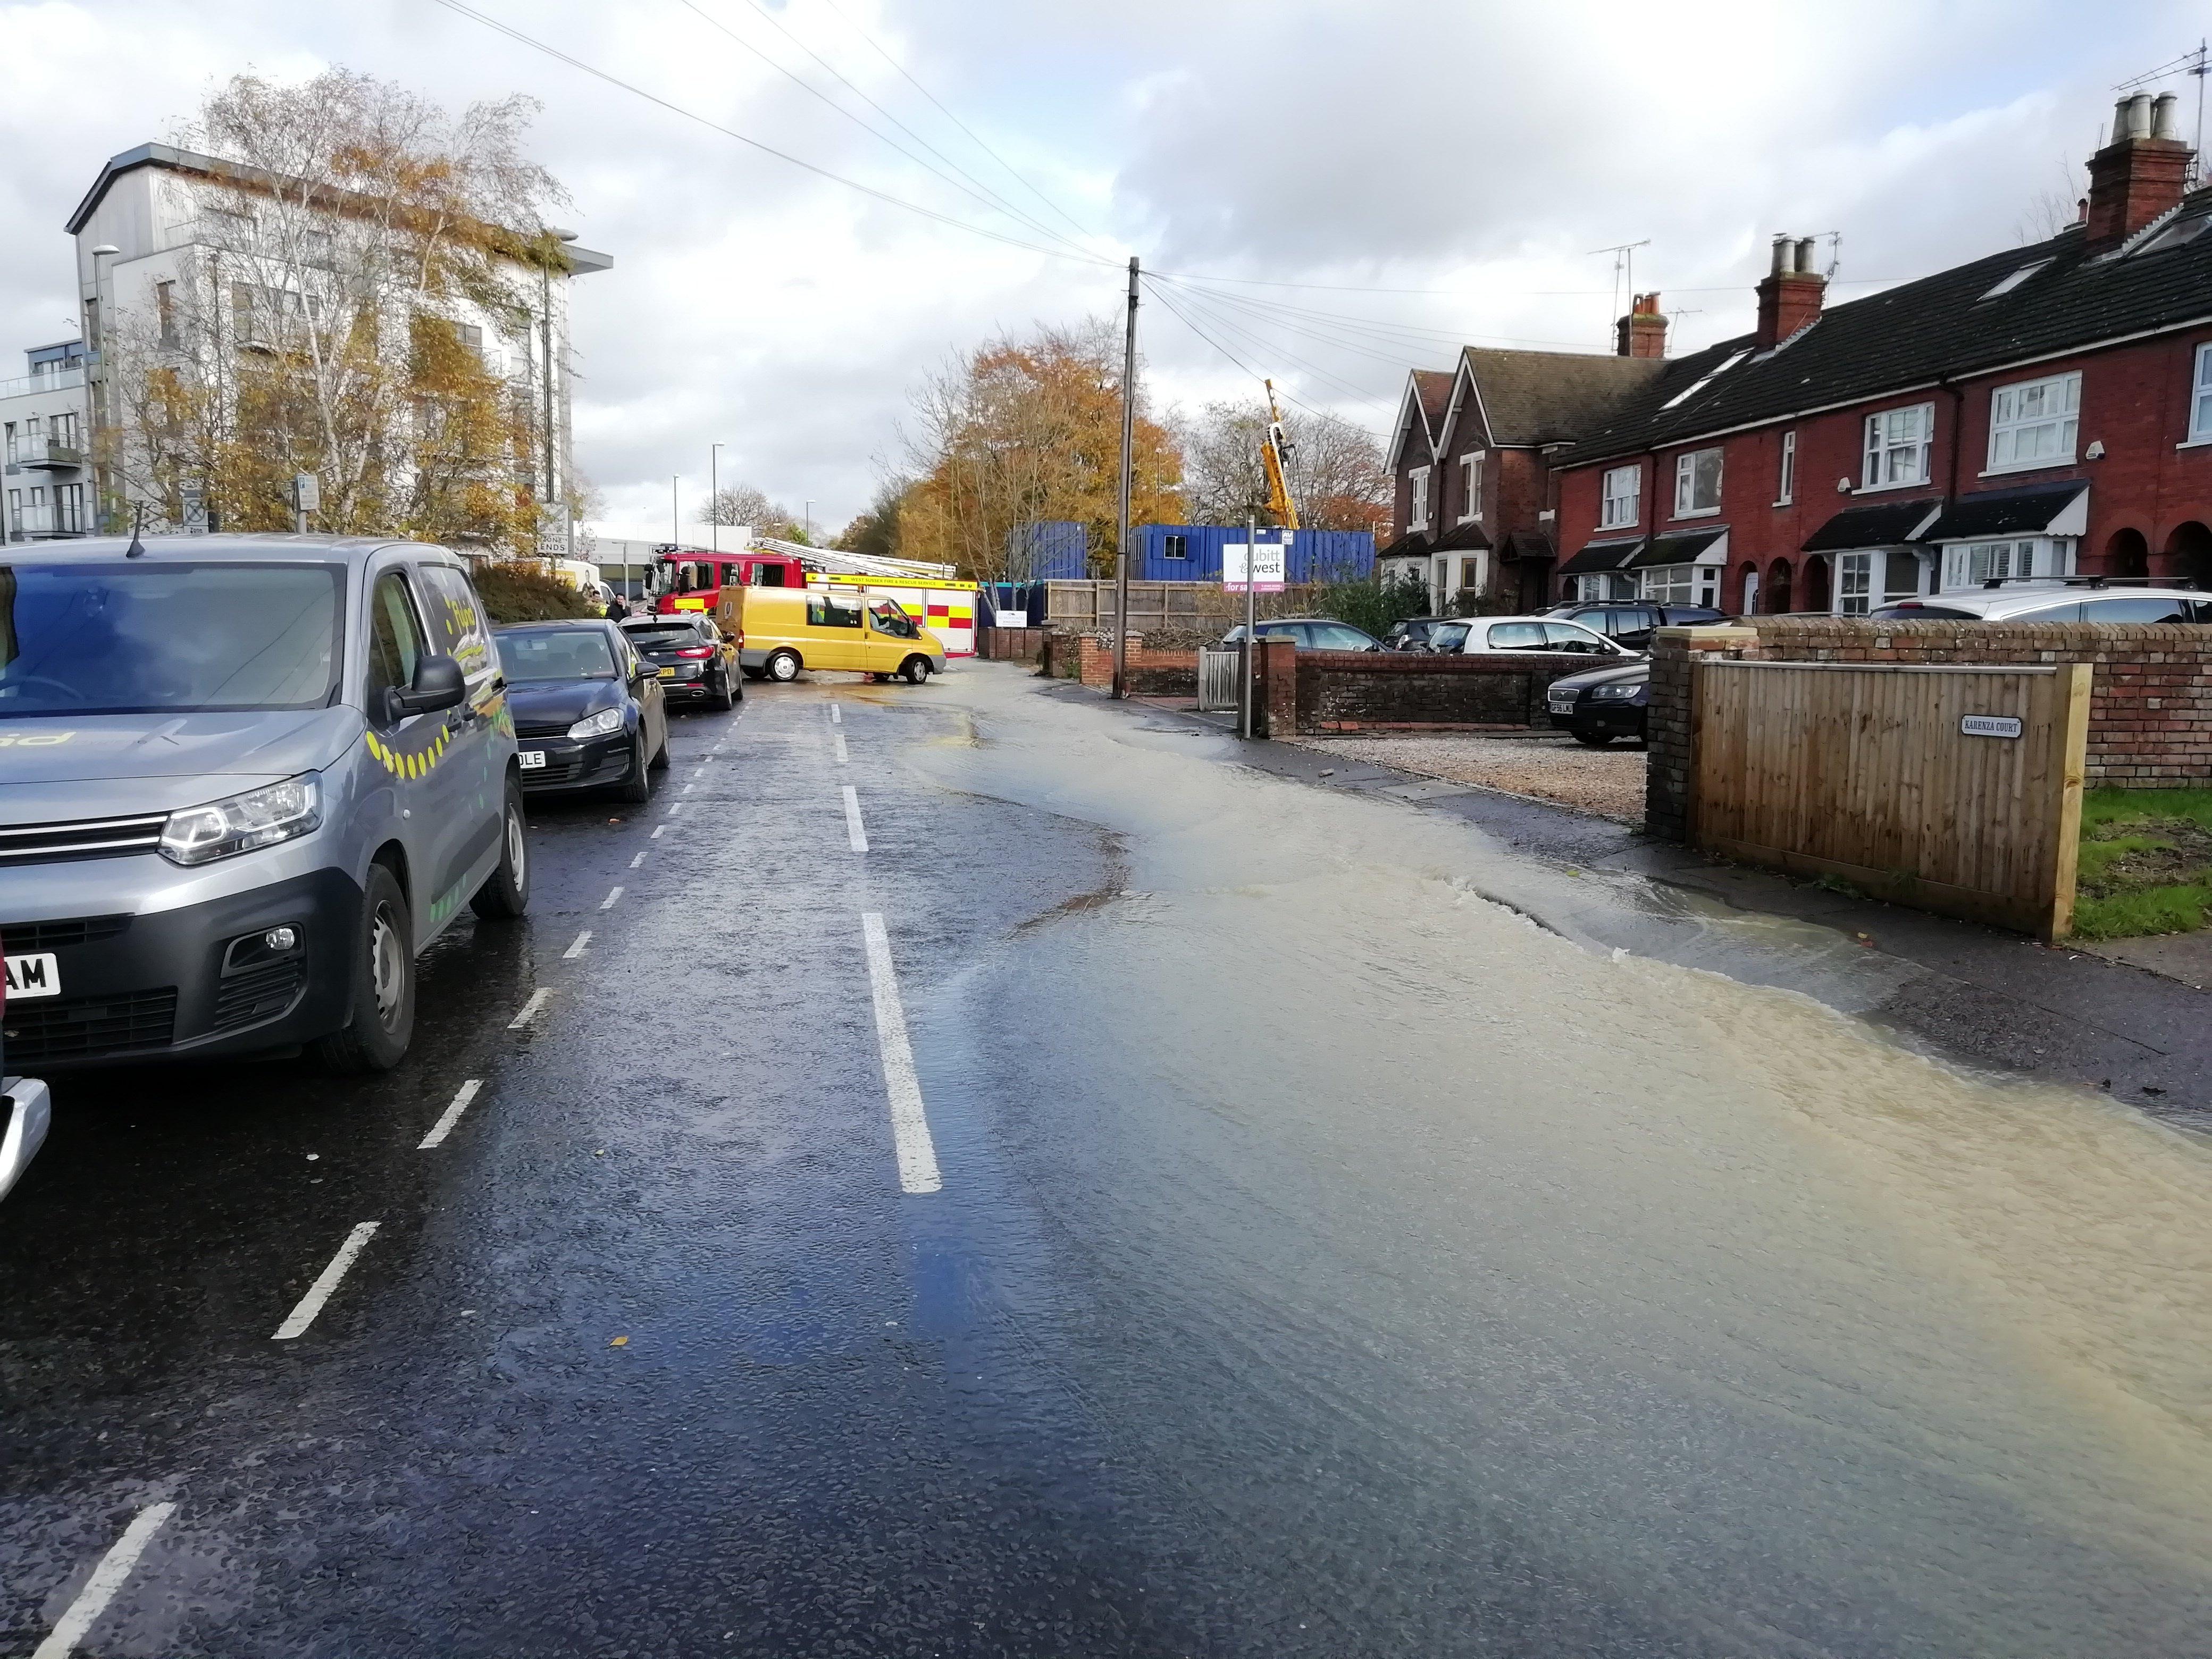 Station Road in Horsham is under a foot of water